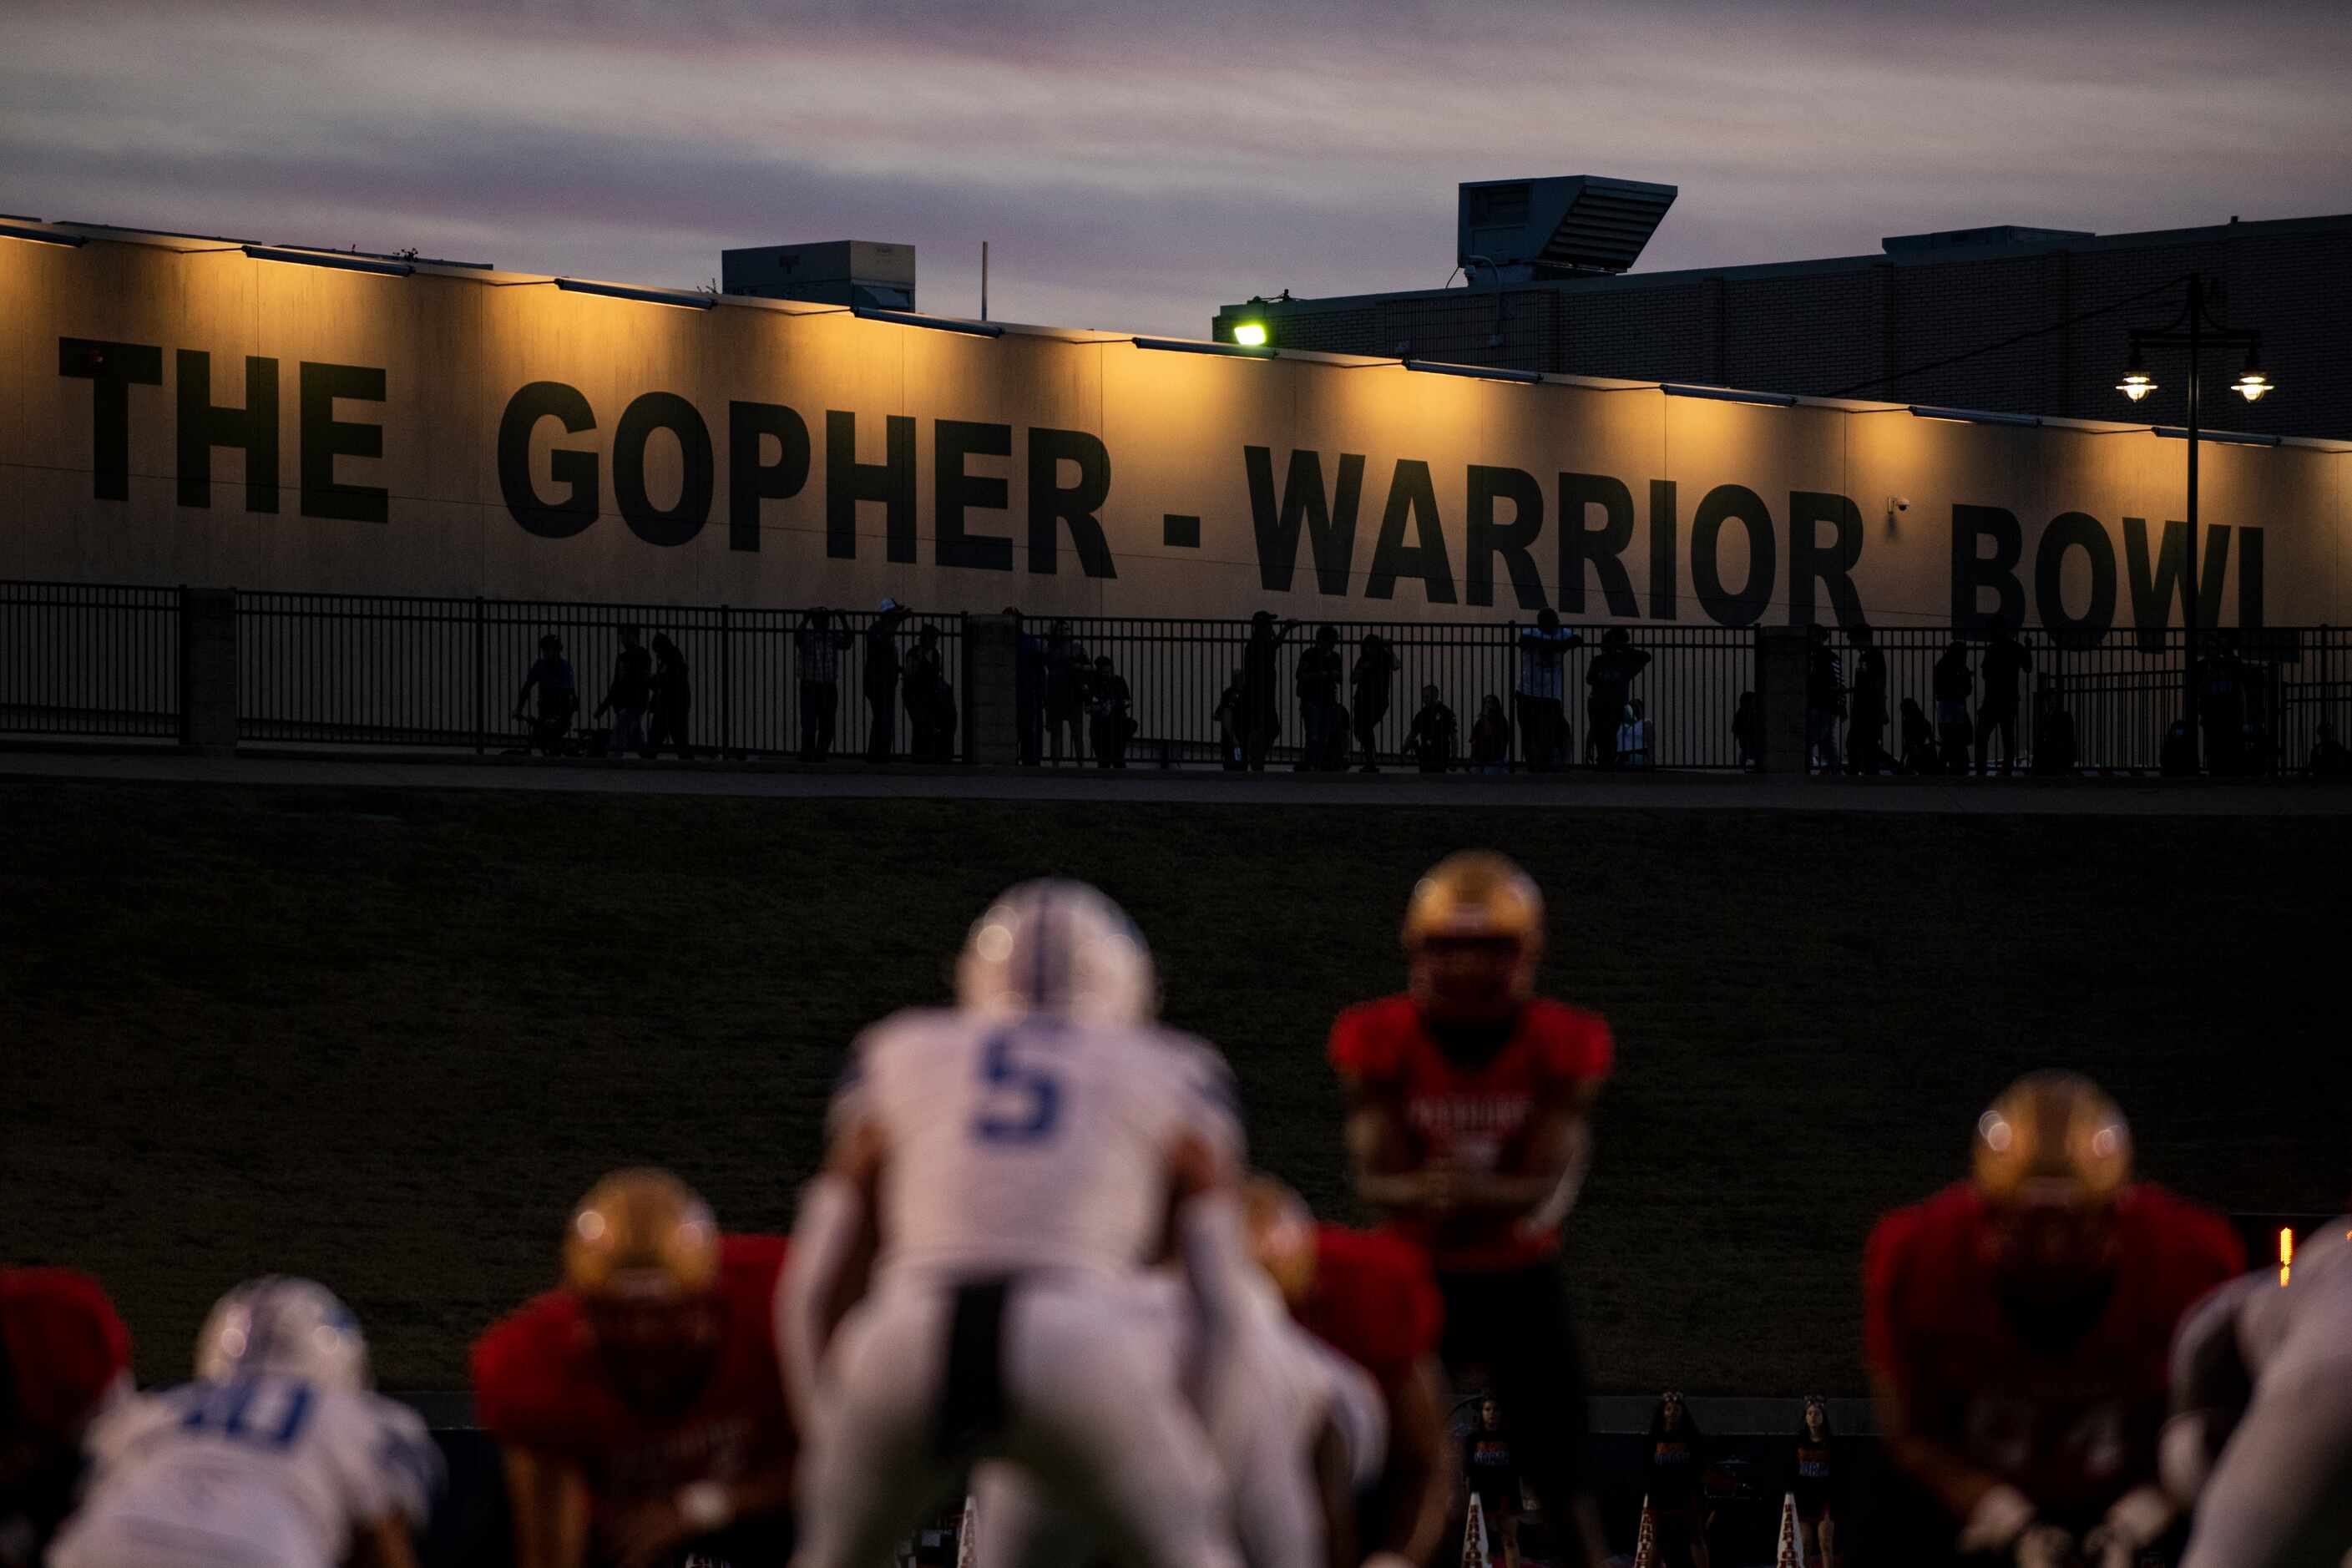 The Gopher-Warrior Bowl wording is illuminated by lights as the sun sets during South Grand...